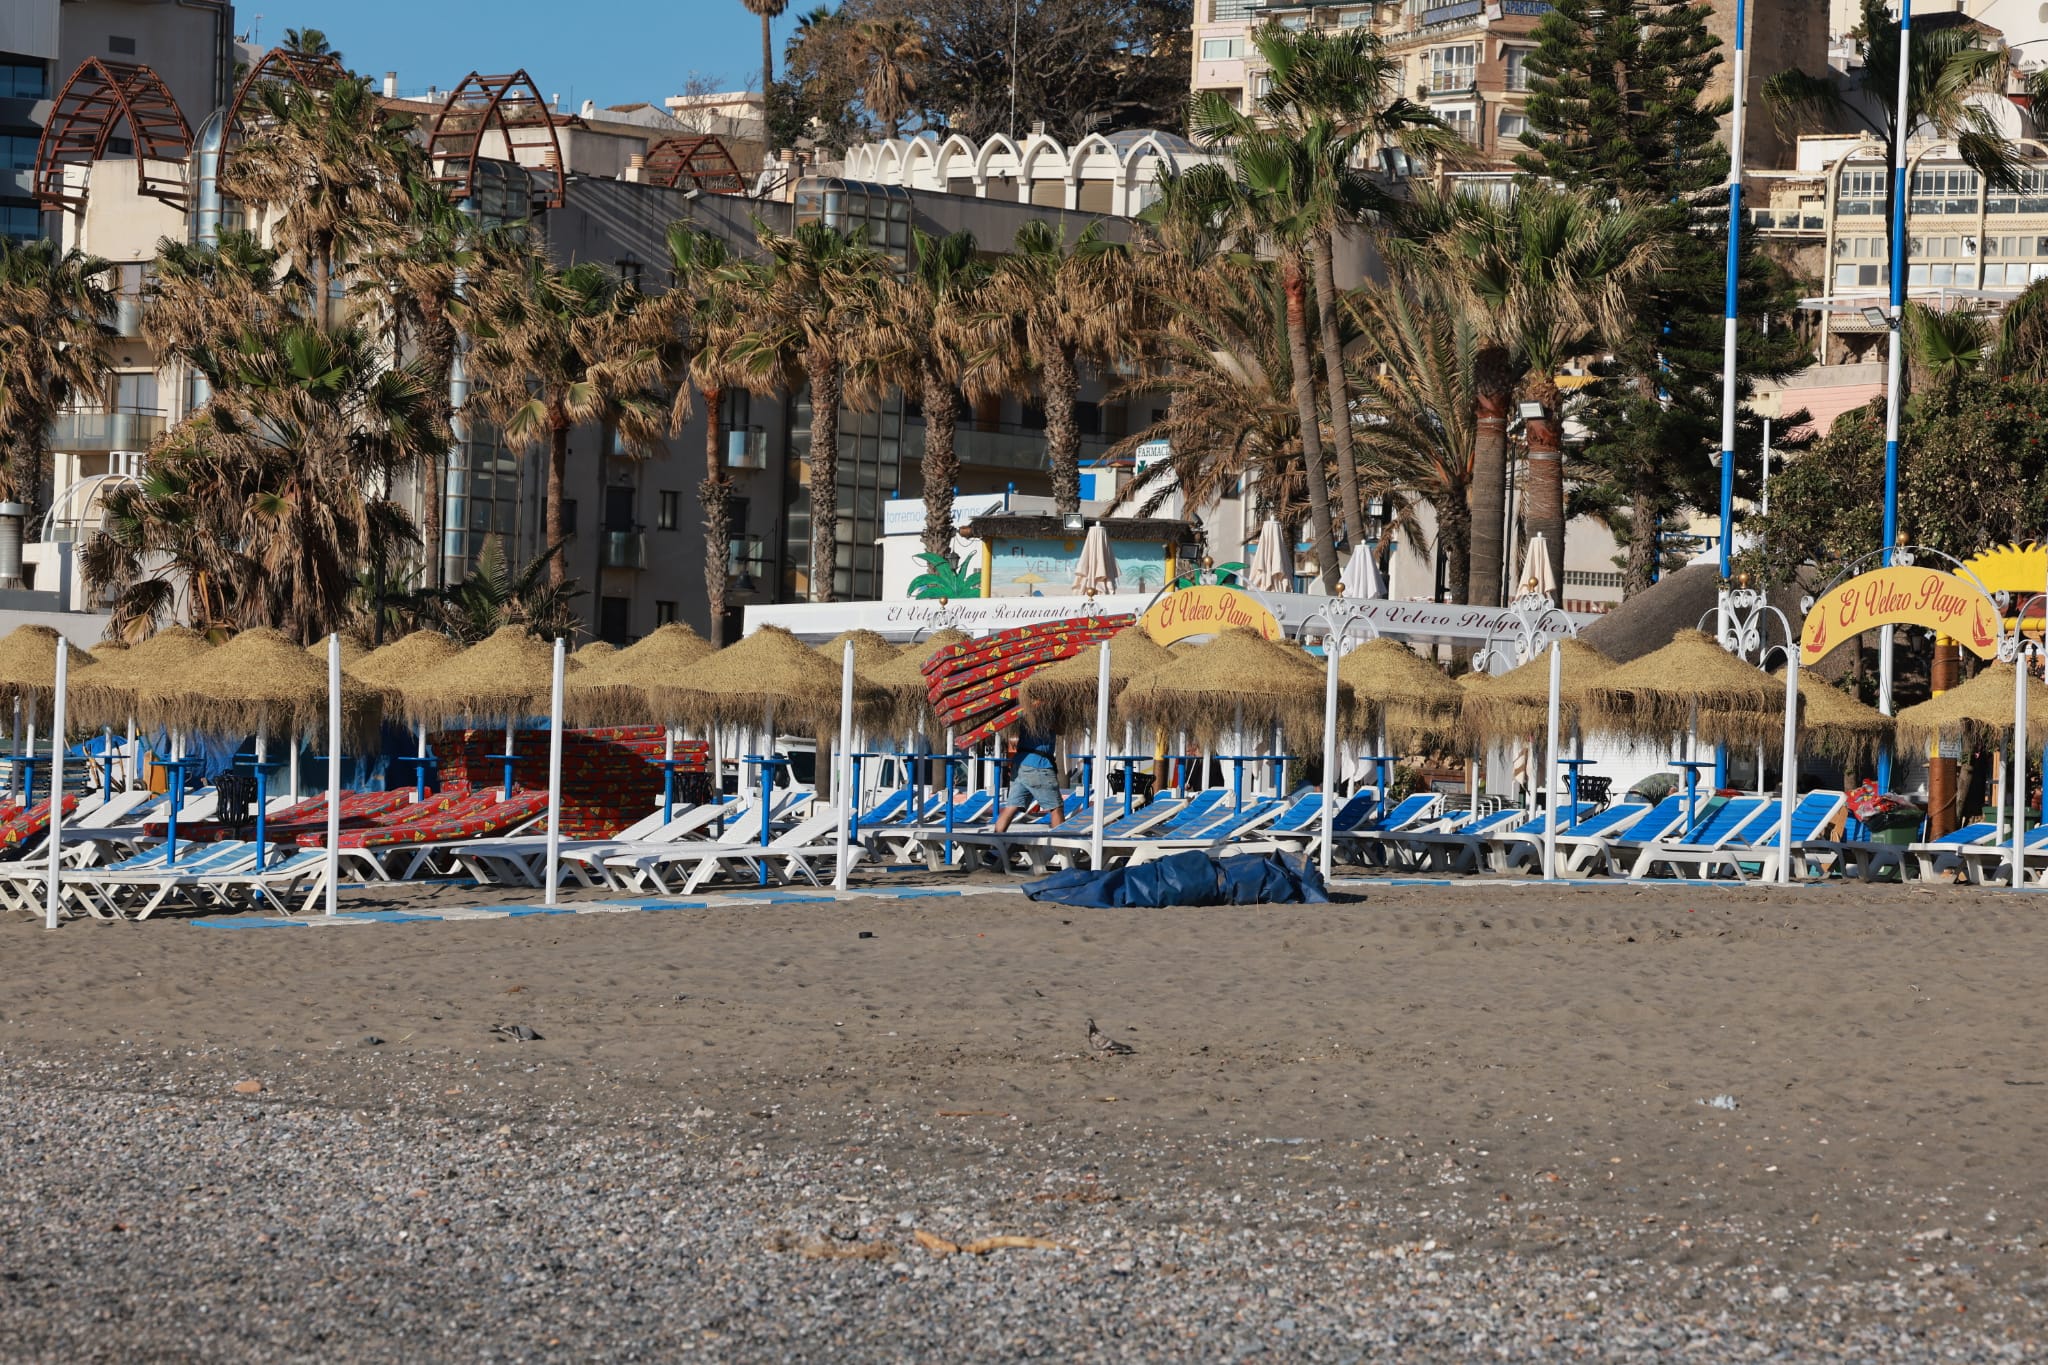 Working against the clock on the Huelin and La Malagueta beaches in Malaga city, and also on the beaches of Torremolinos